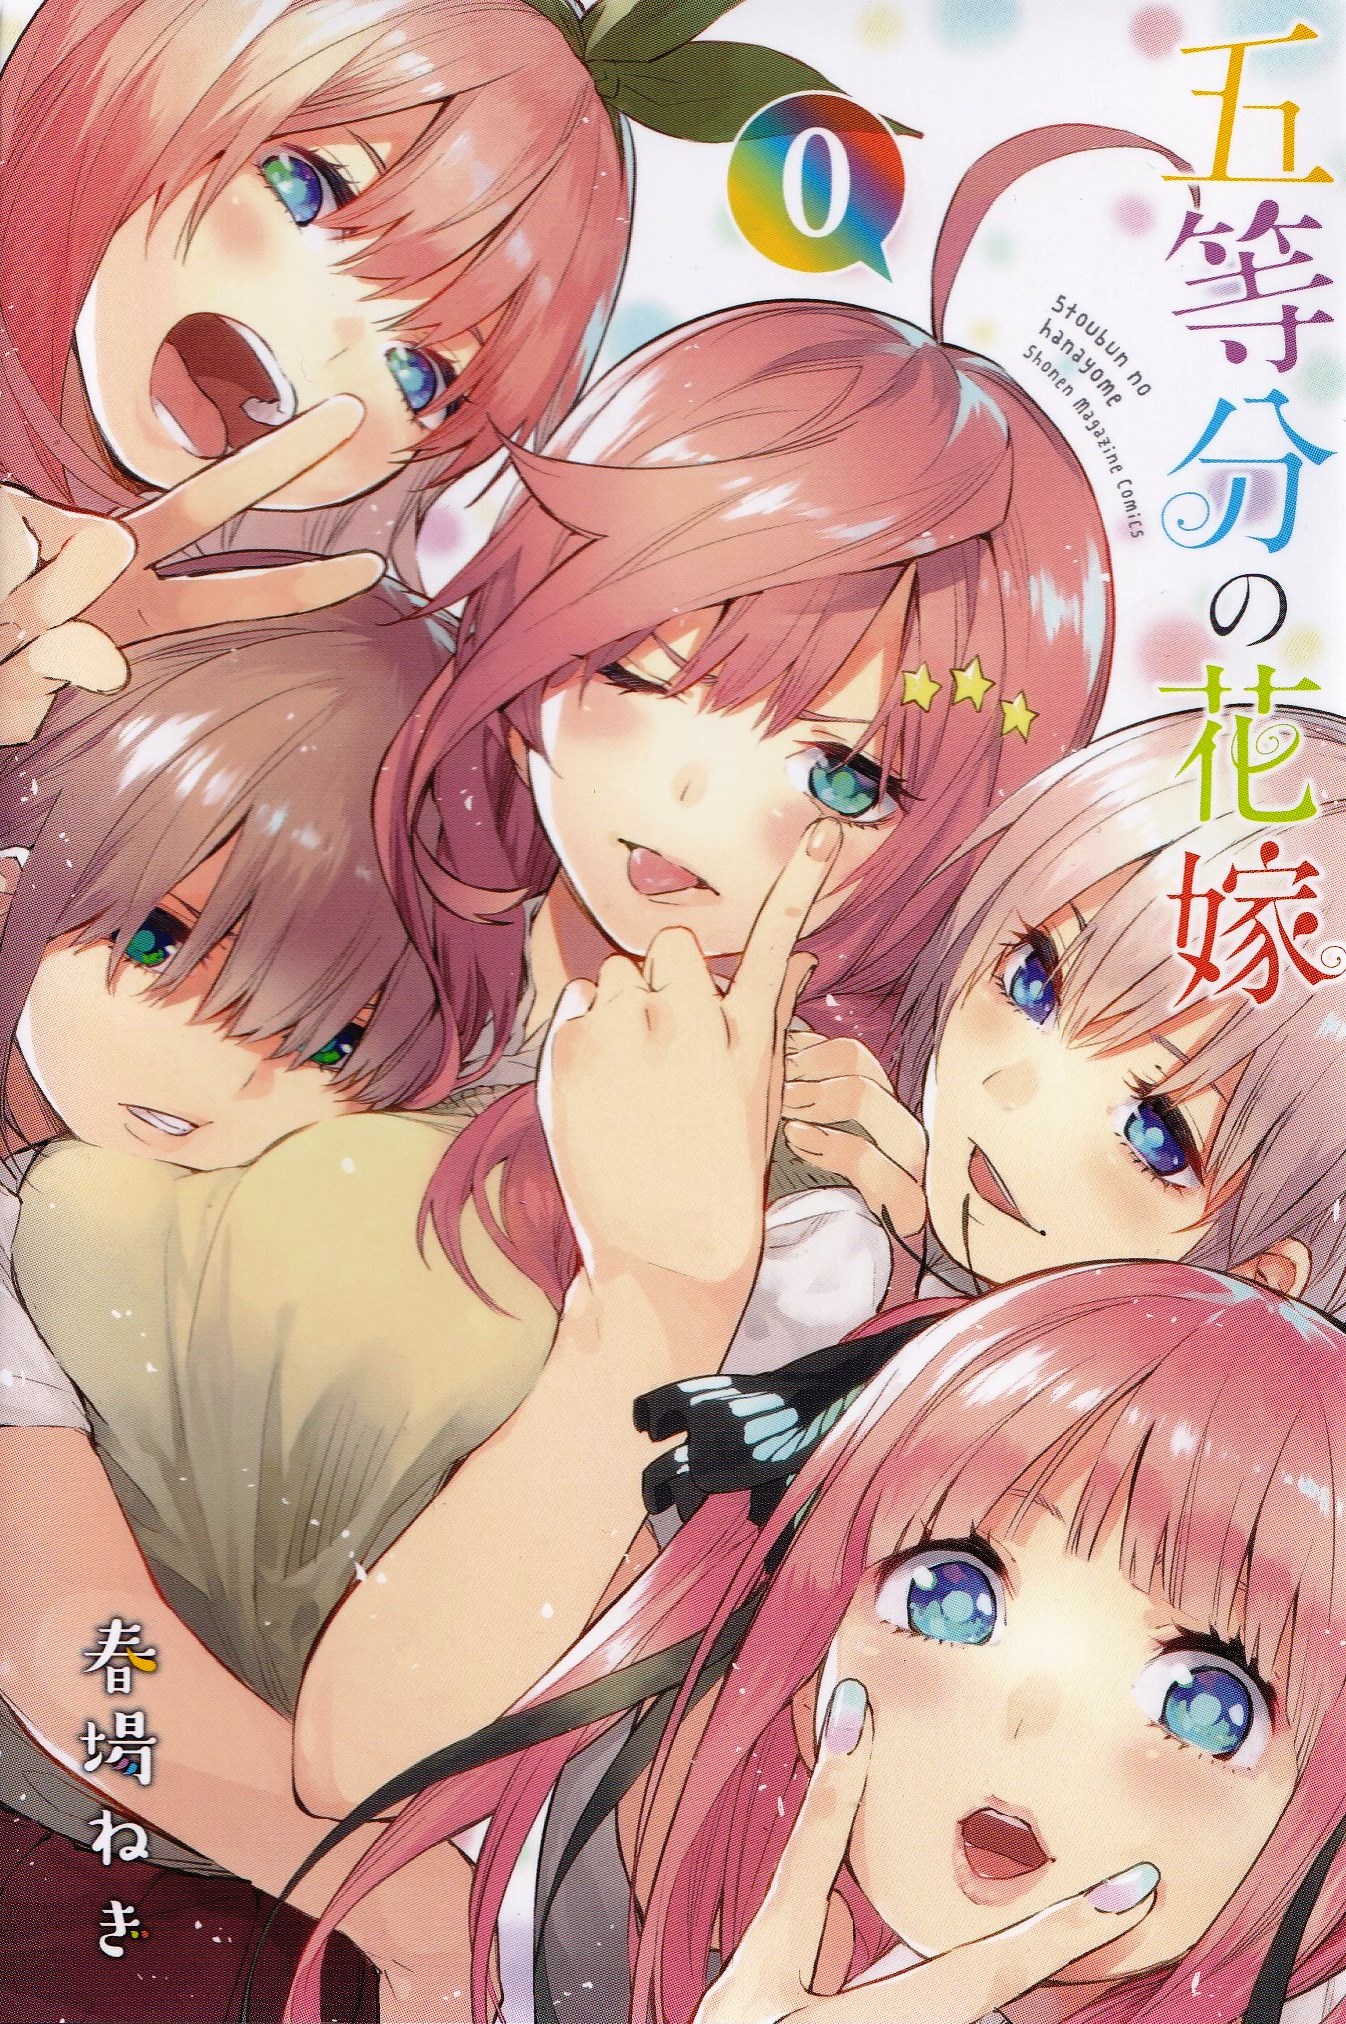 The Quintessential Quintuplets - Full Color Edition Scan ITA